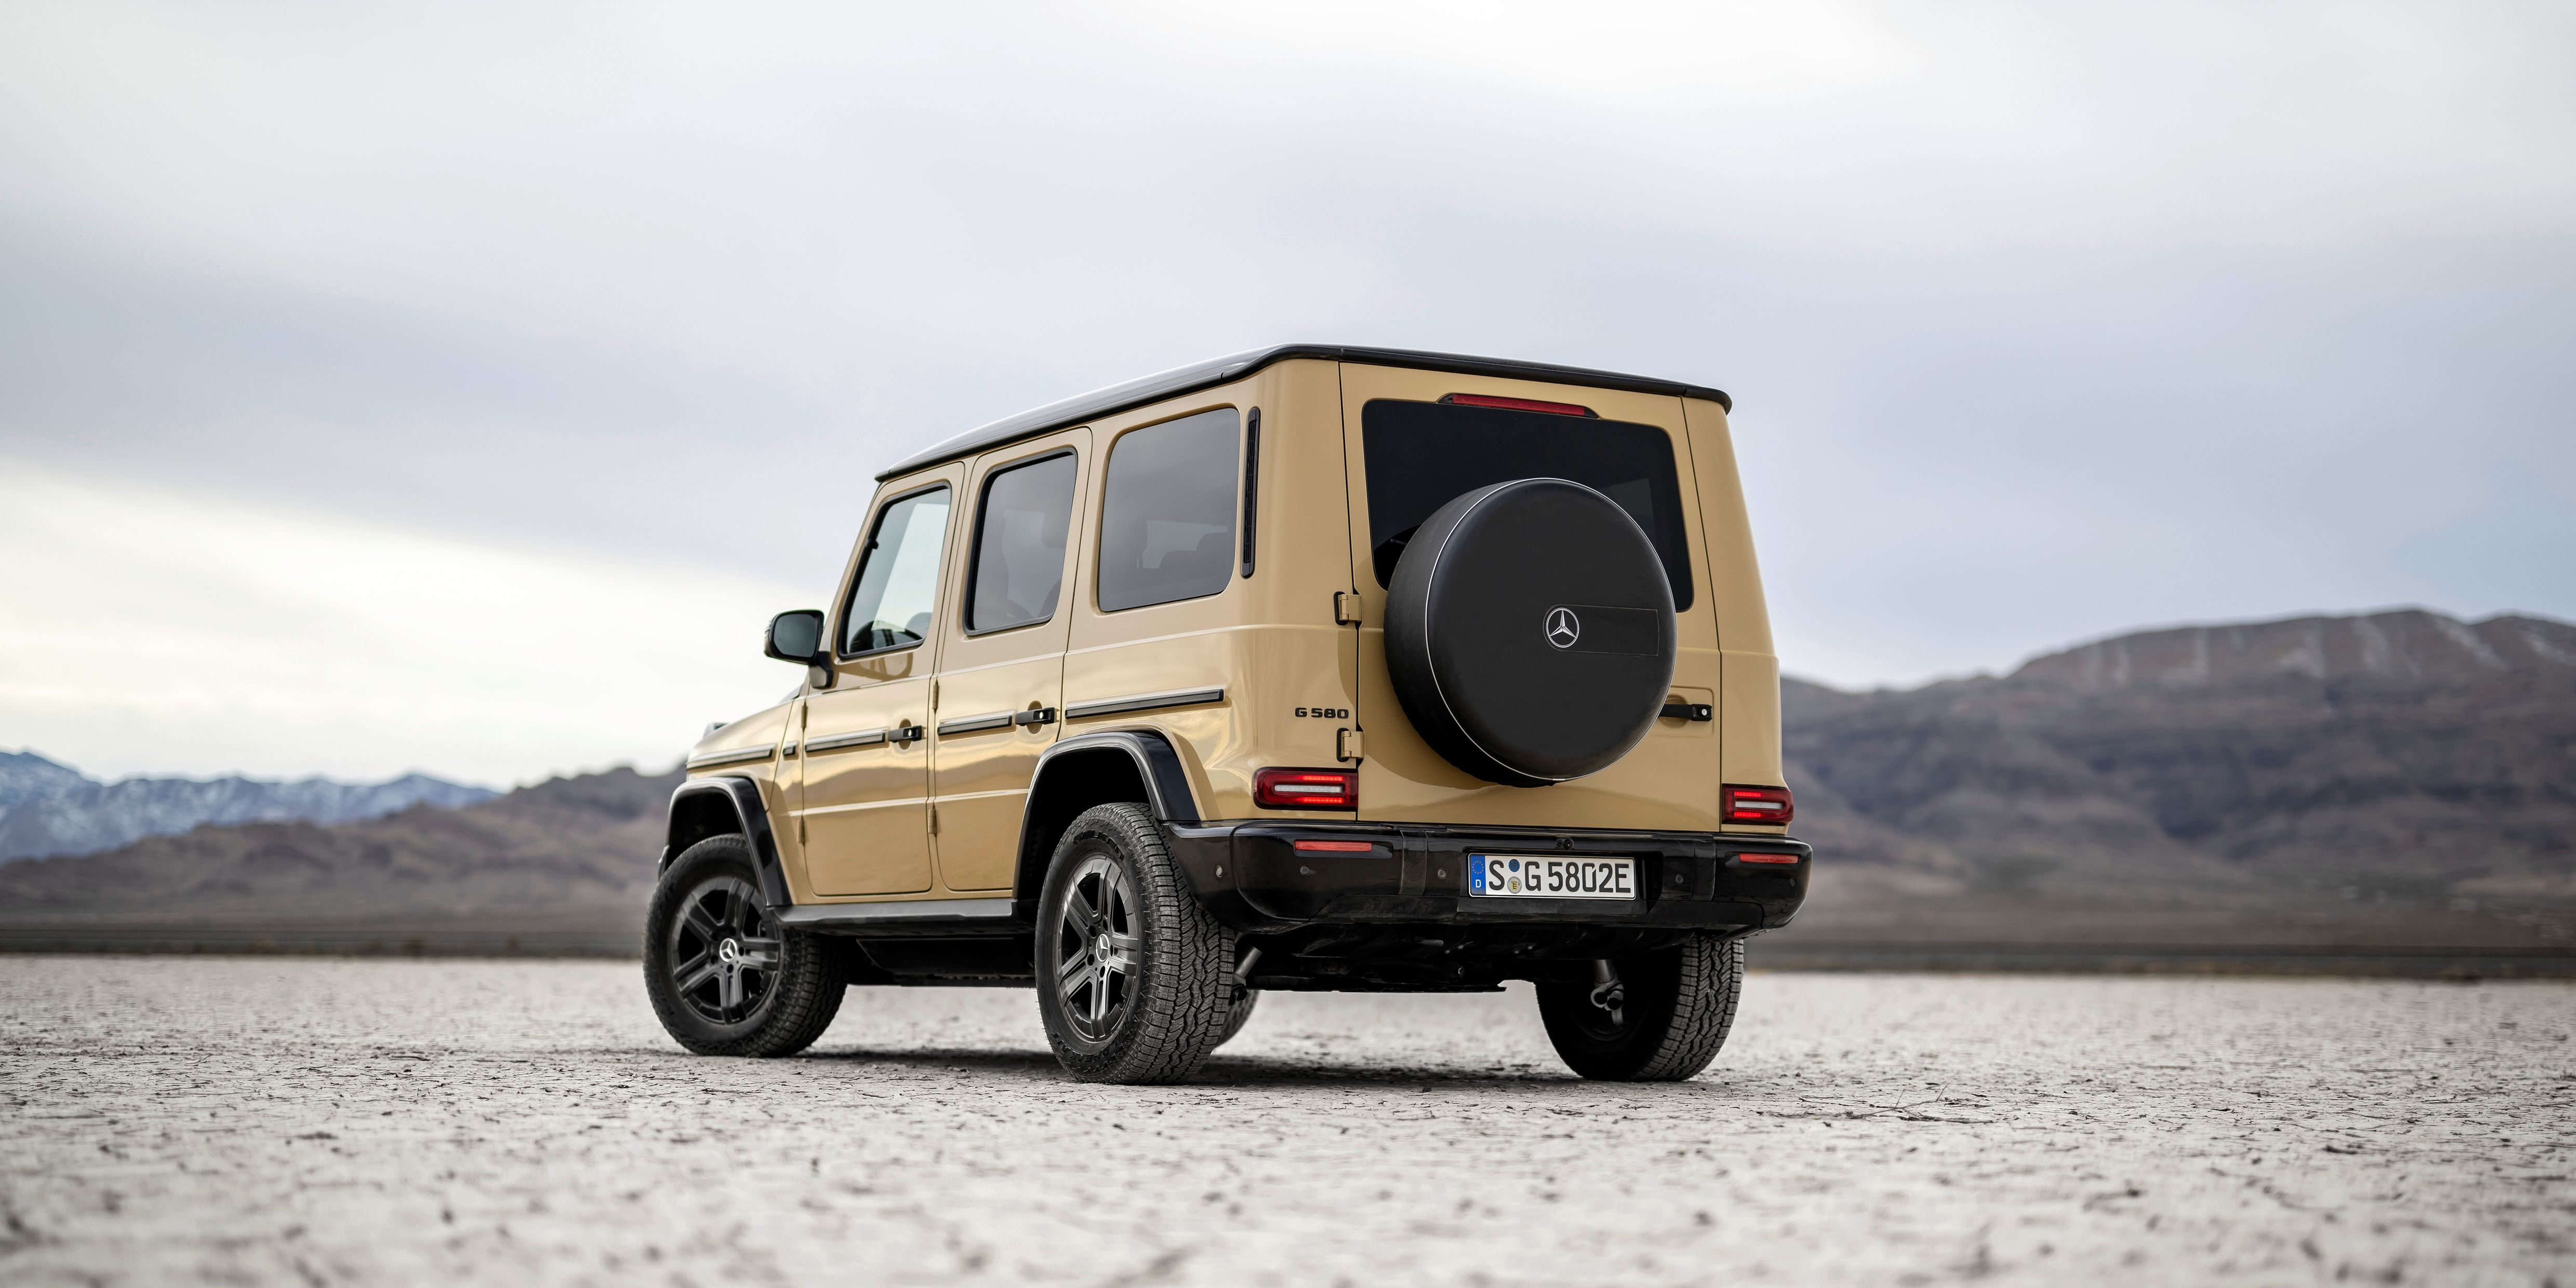 The Mercedes G-Wagen EV Makes Unique Sounds 'Inspired' by ICE Cars